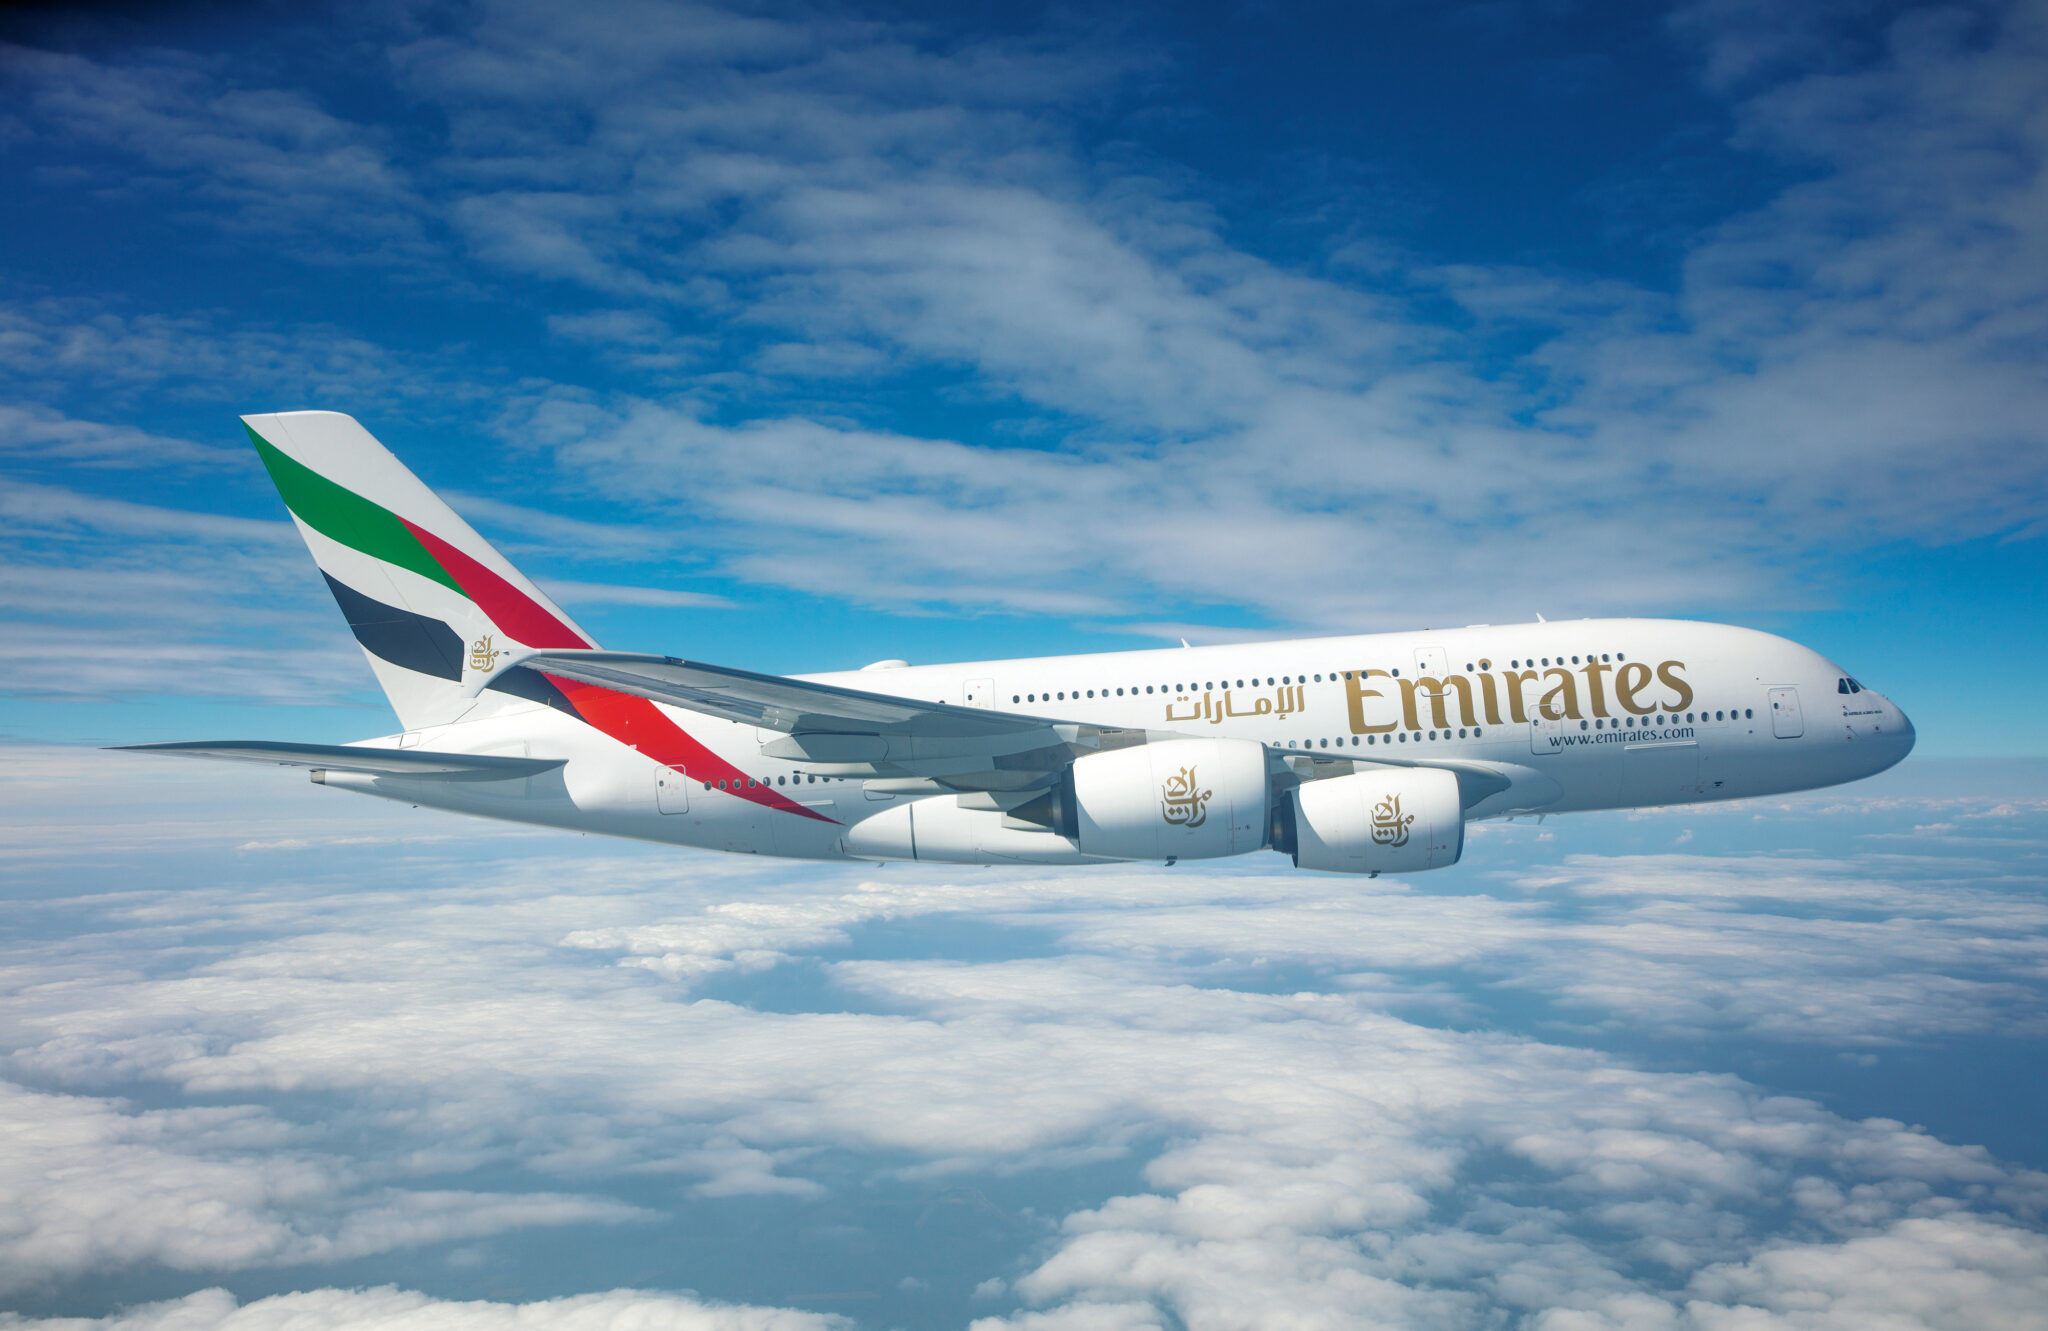 Emirates to launch first Airbus A380 service to Bali